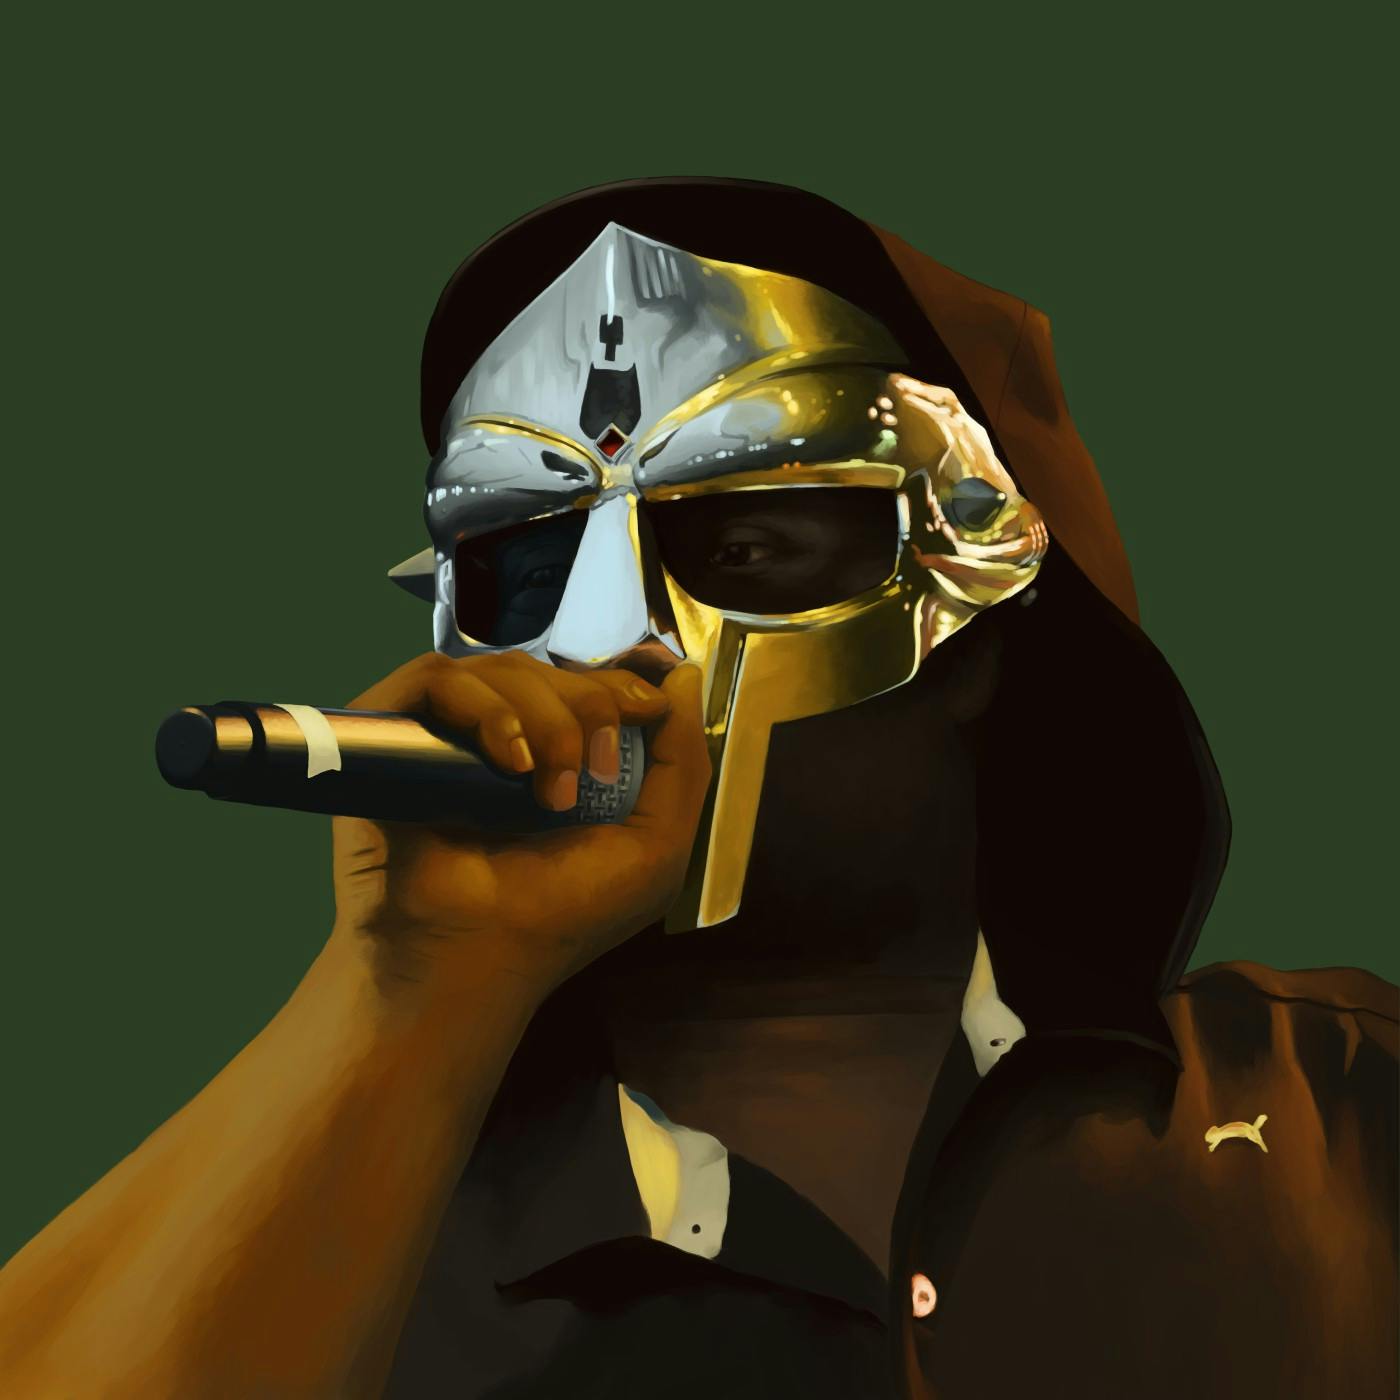 A digital painting of rapper MF DOOM wearing a hooded black shirt and his iconic mask reflecting the environment; he is holding a microphone to his mouth.